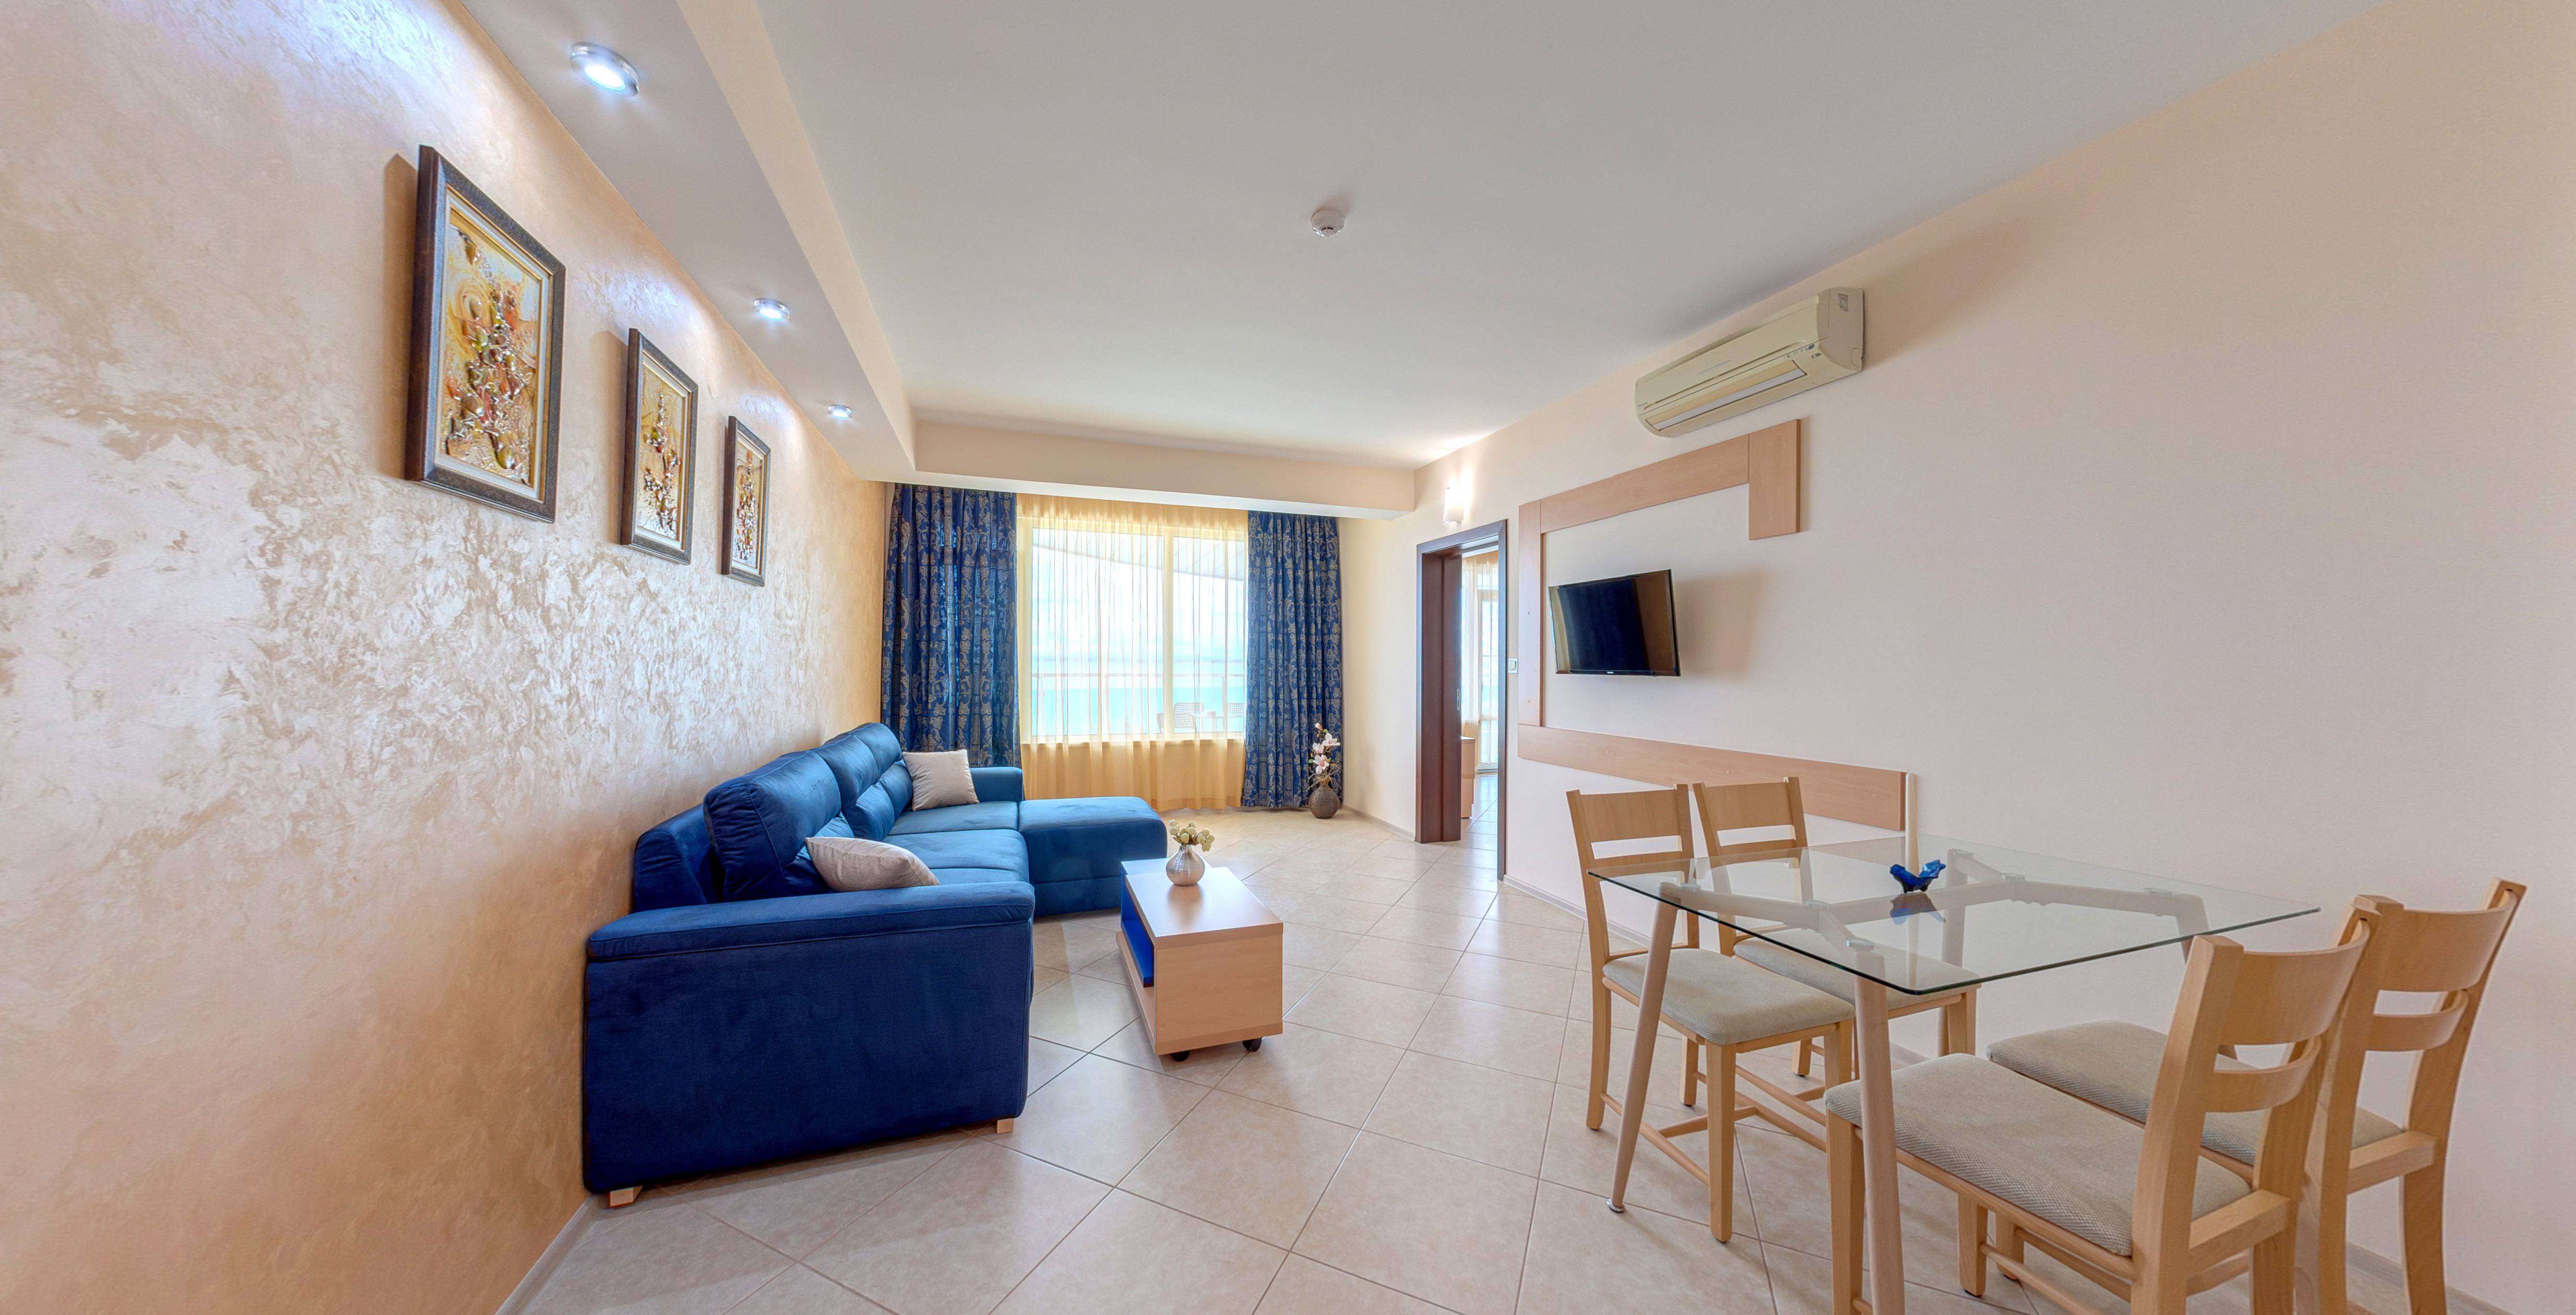 One-bedroom apartment in Blue Bay